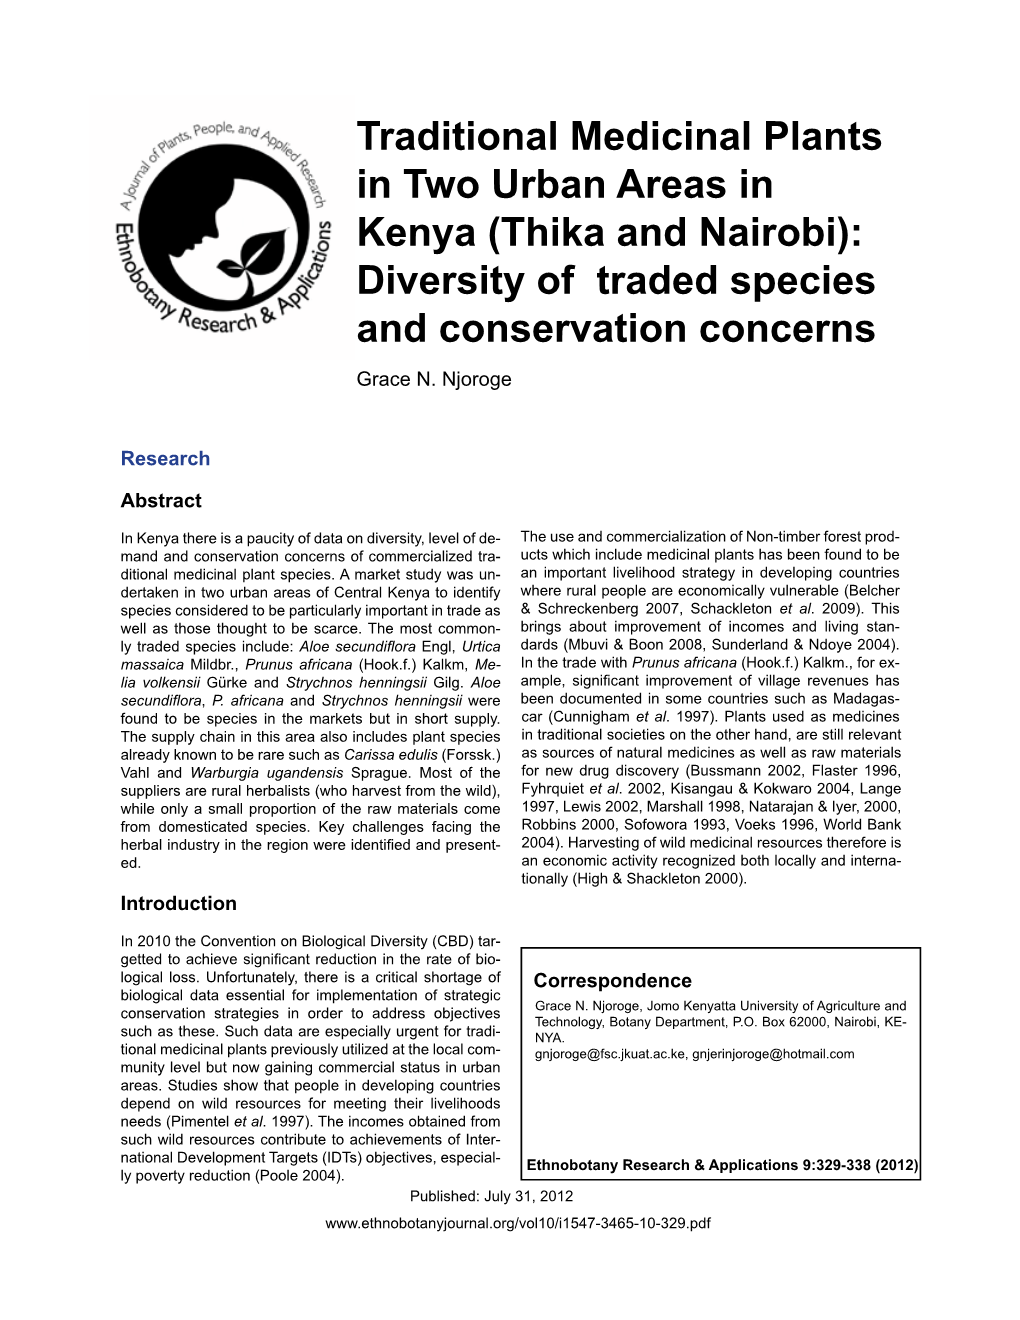 Traditional Medicinal Plants in Two Urban Areas in Kenya (Thika and Nairobi): Diversity of Traded Species and Conservation Concerns Grace N